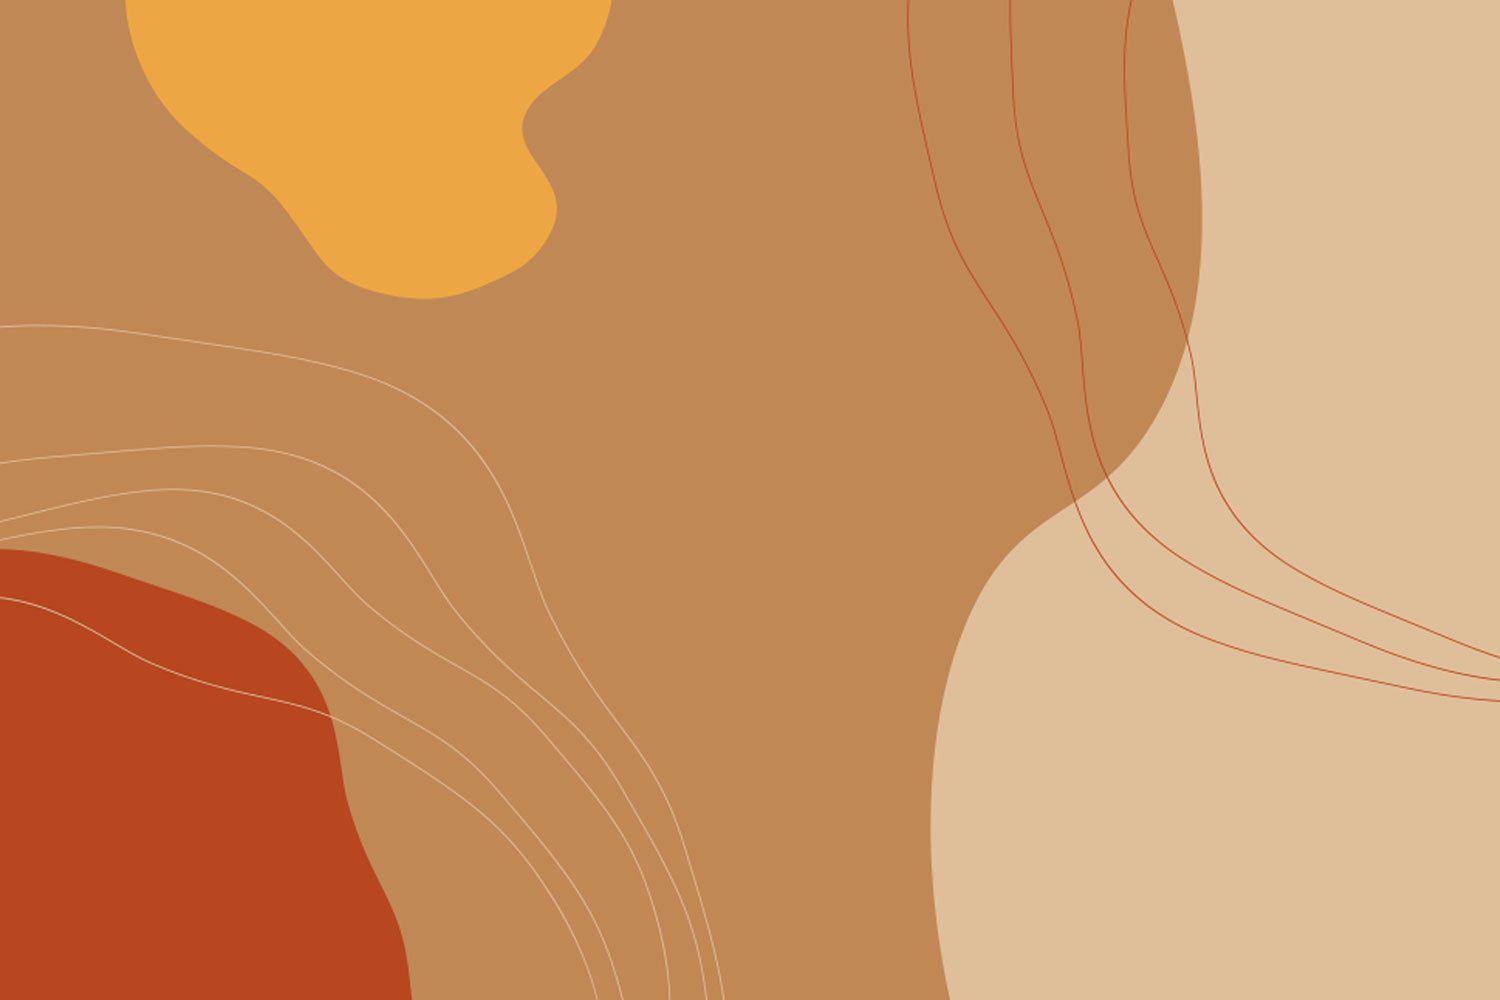 A graphic with a tan background and abstract shapes in reds and oranges. - Earth, abstract